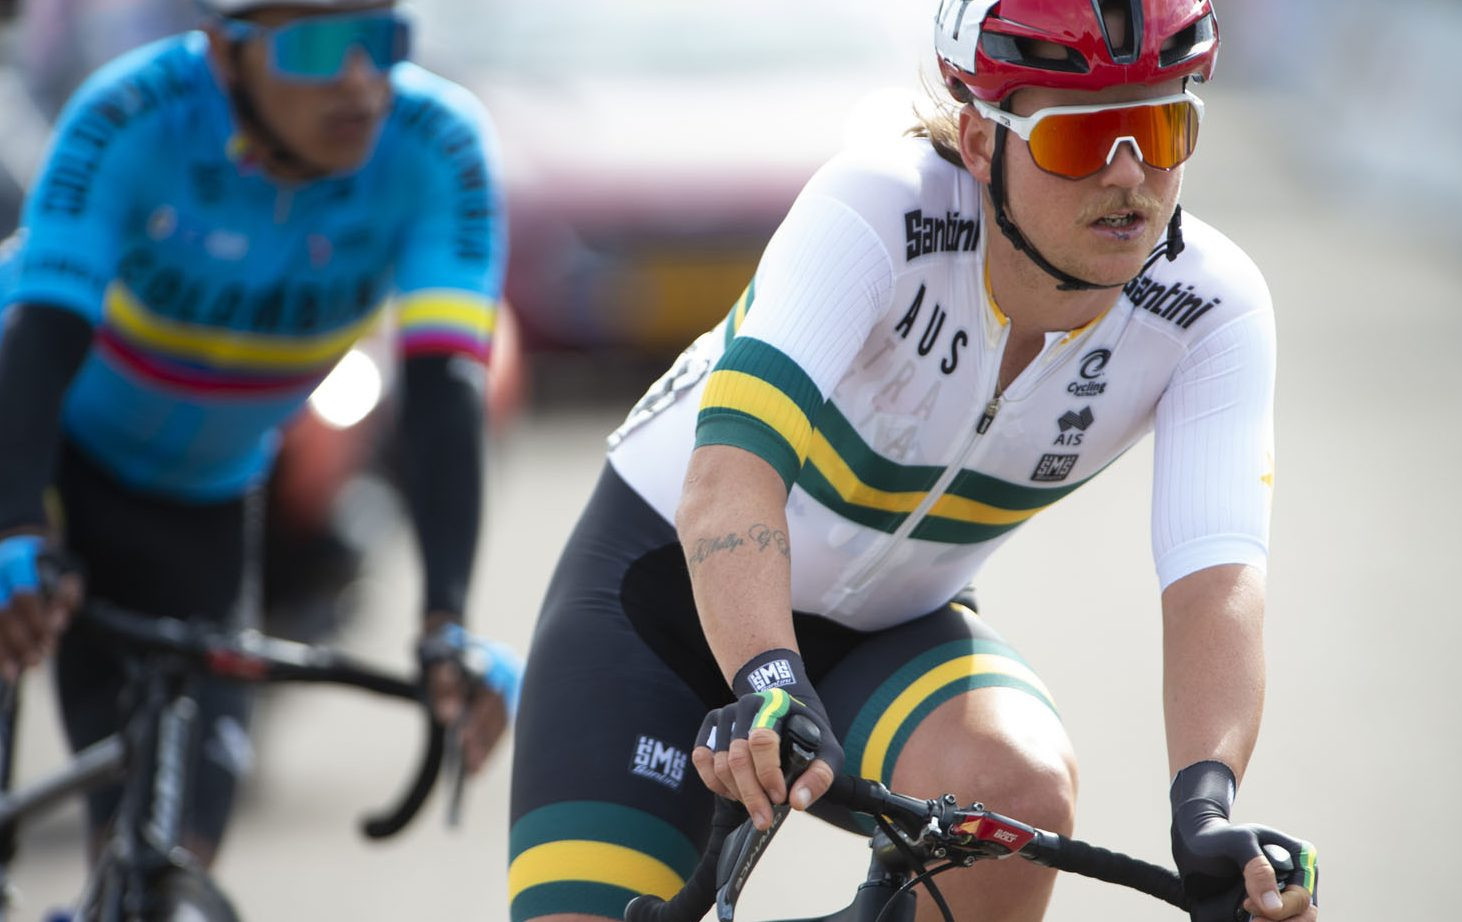 The athletes selected to represent Australia at the 2020 UCI Para-cycling Road World Championships have been named ©Paralympics Australia